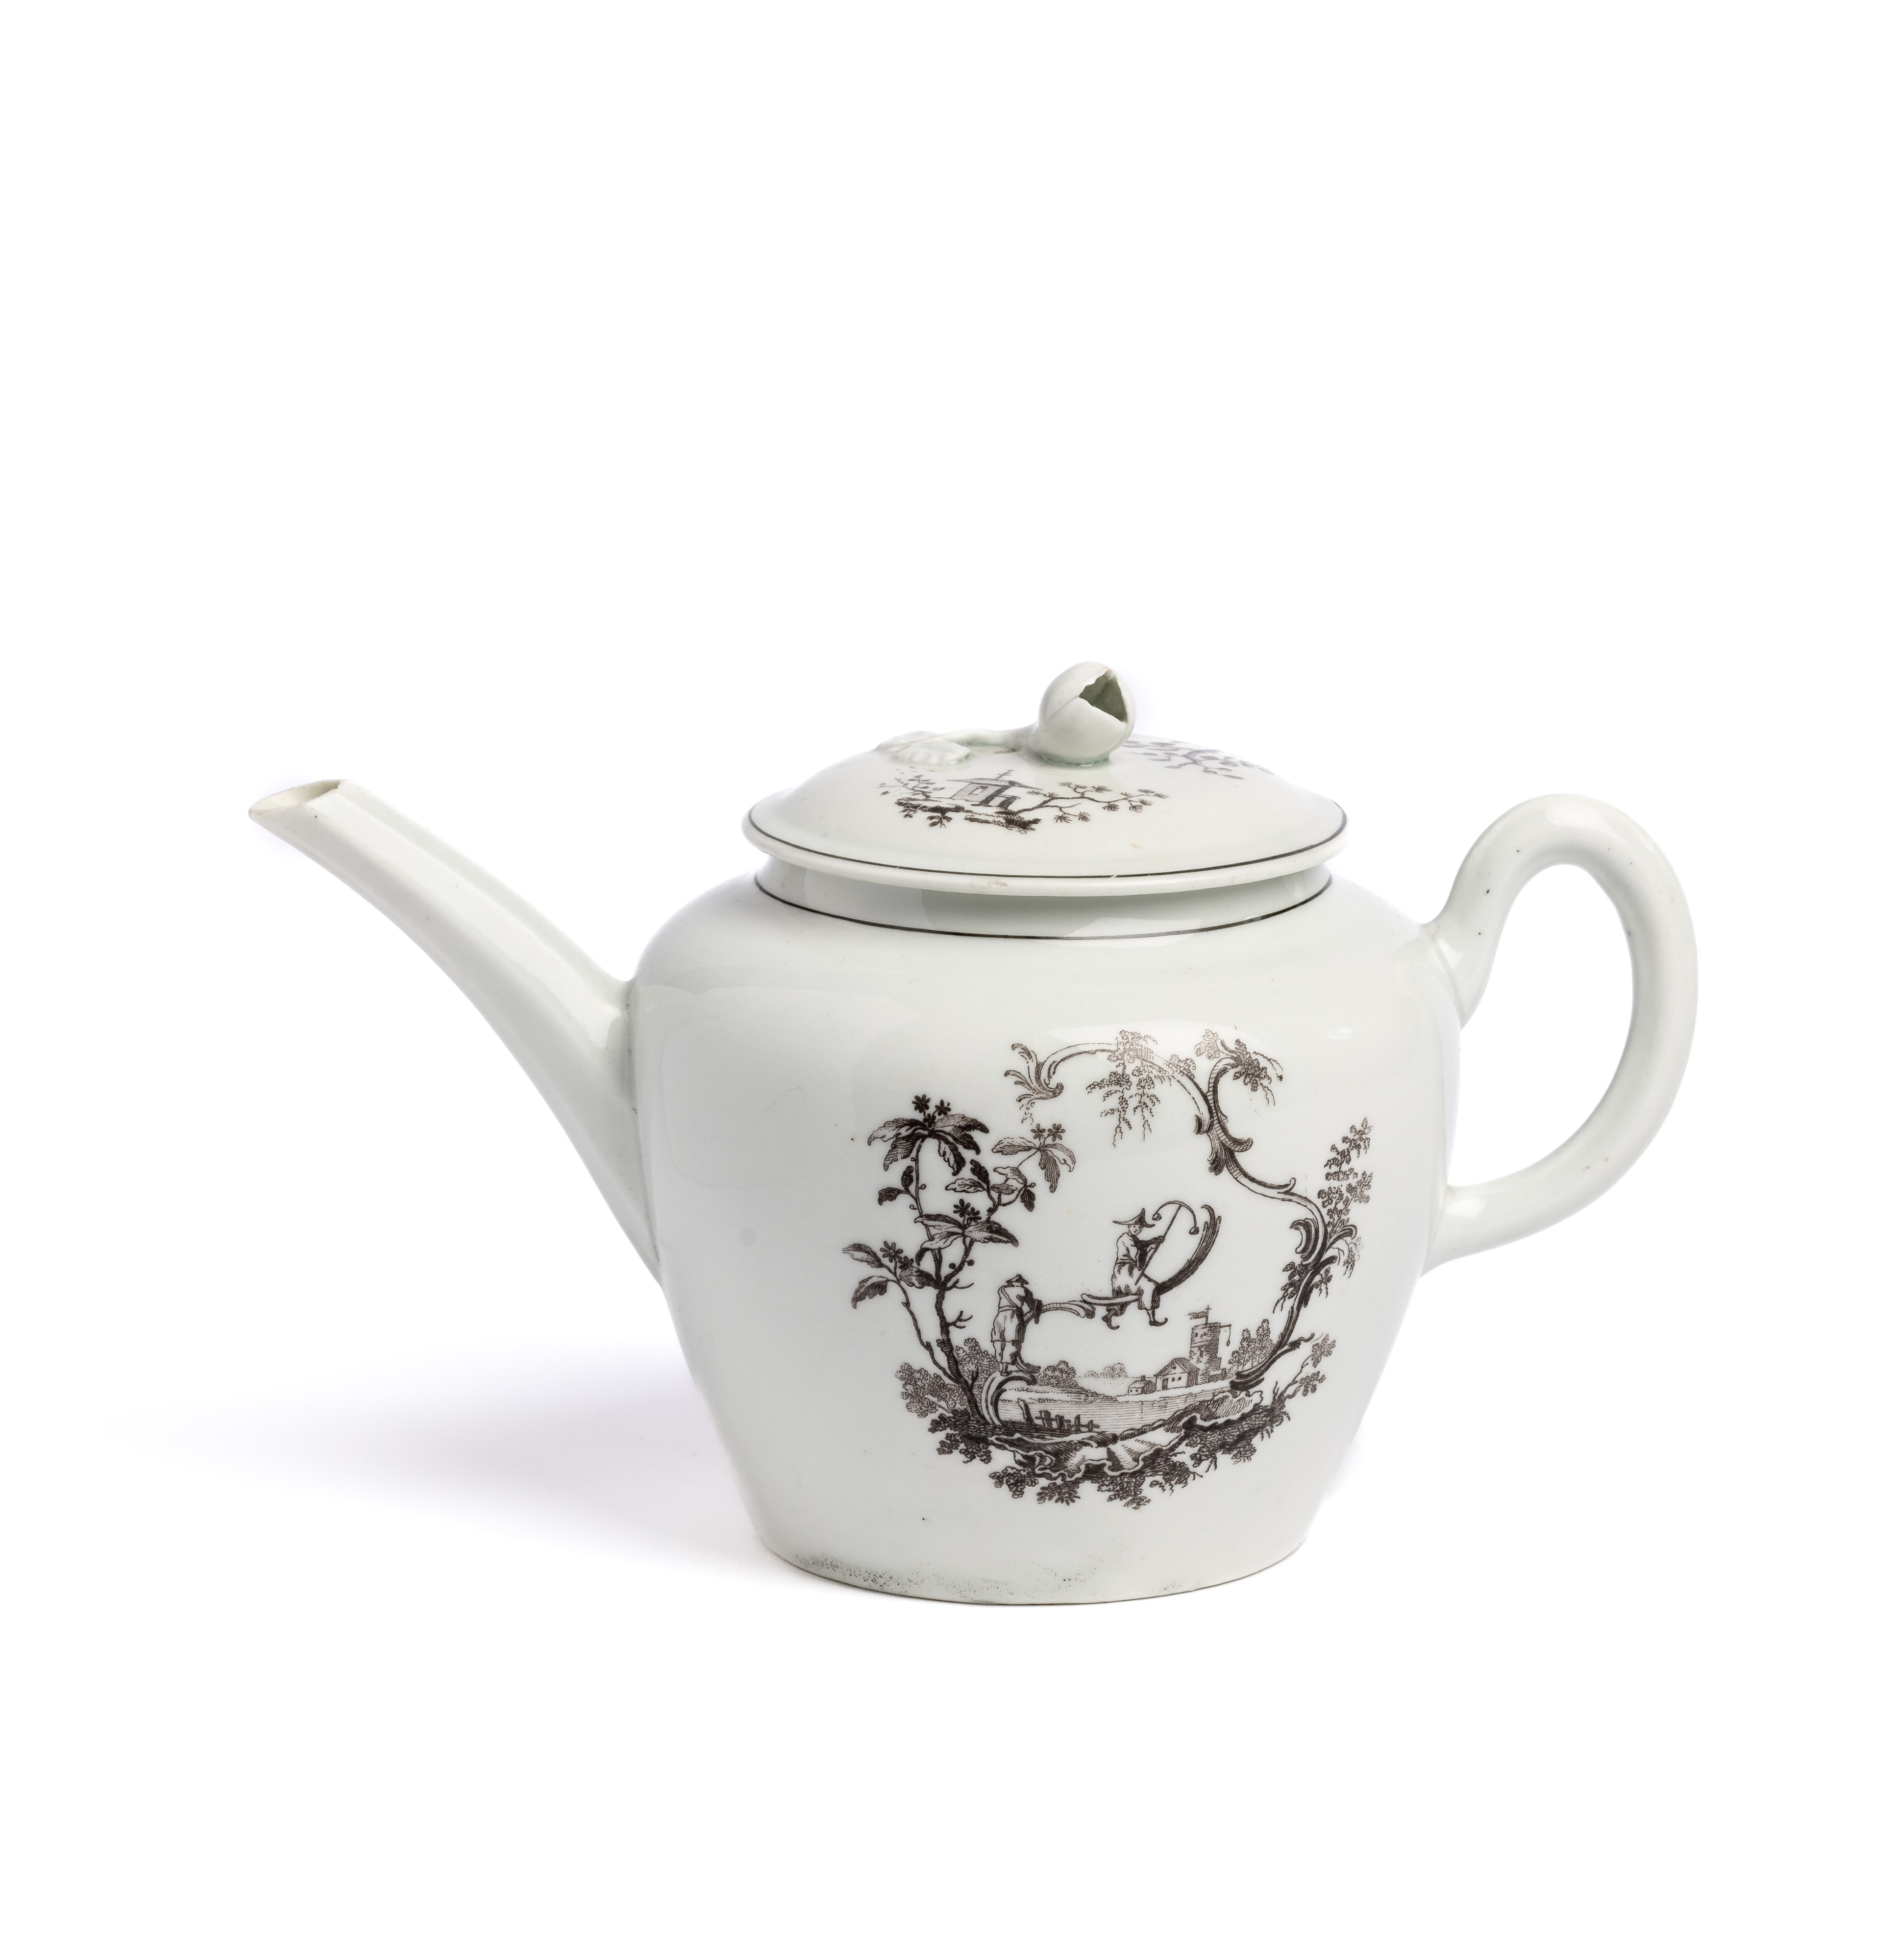 ‡ A WORCESTER TEAPOT AND COVER, CIRCA 1756-60